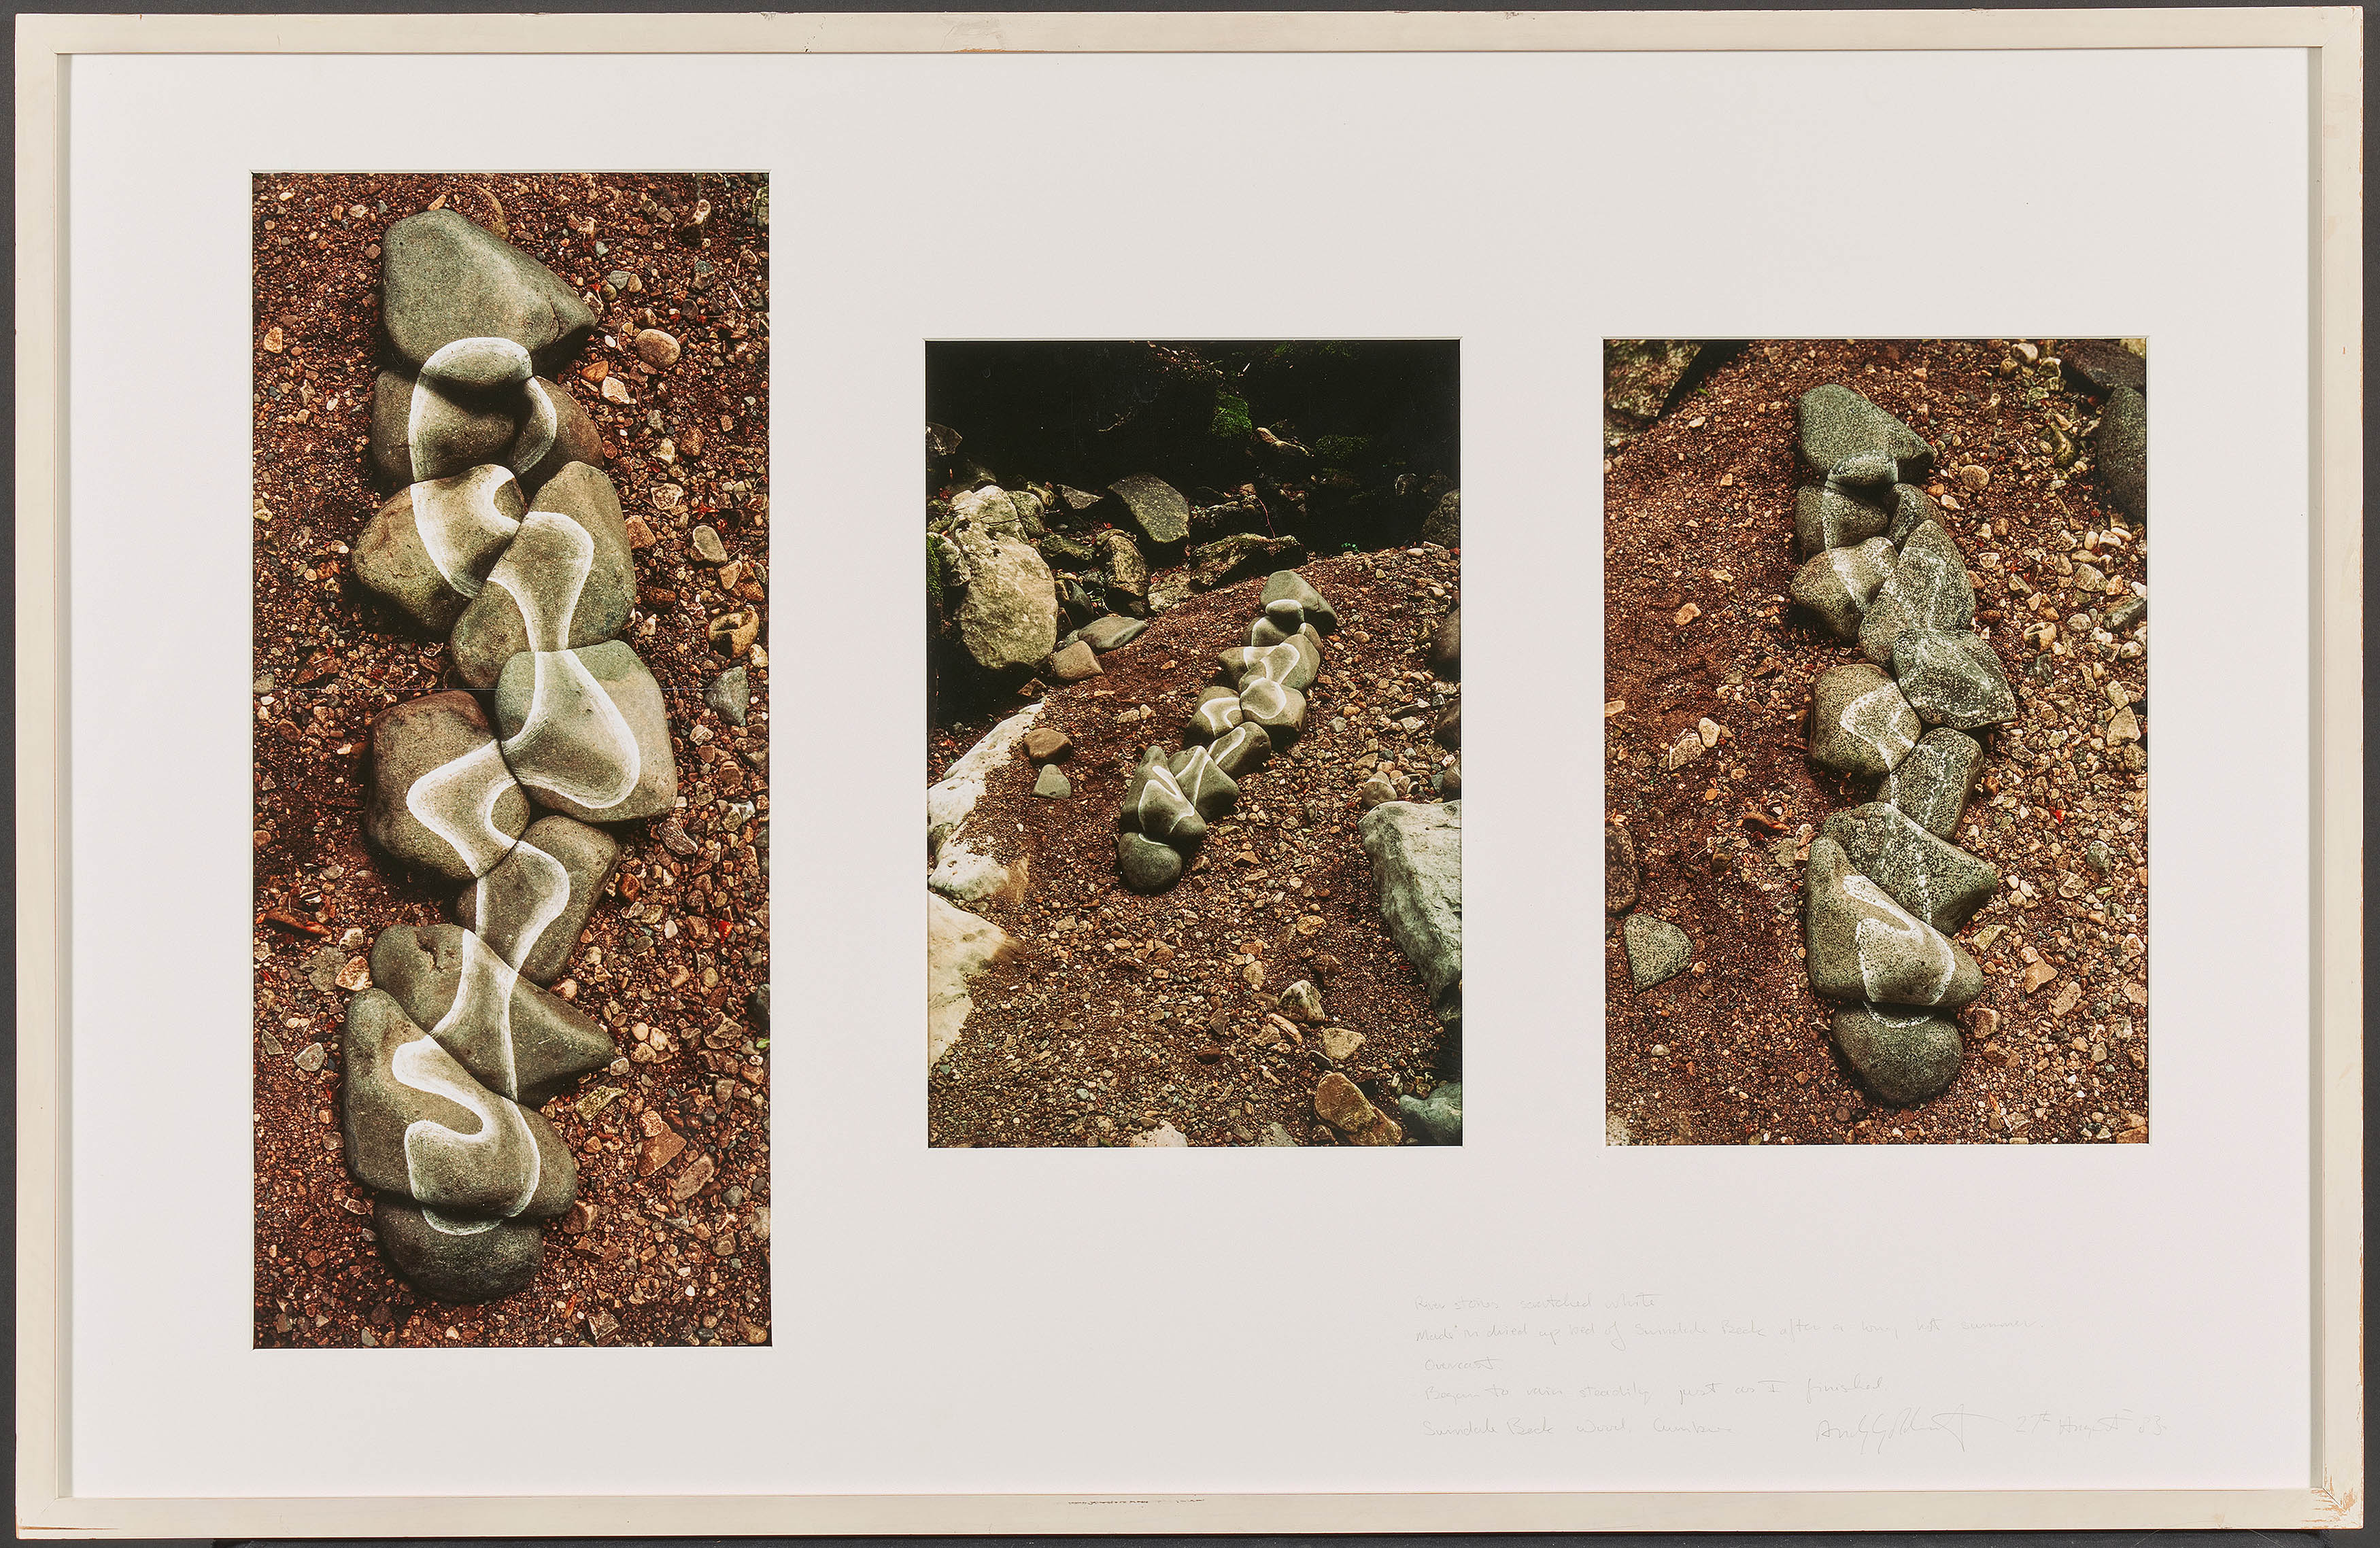 Andy Goldsworthy - River stones scratched white<br > made in dried-up bed of Swindale Beck after a long hot summer <br >over cast<br > began to rain steadily just as I finished, 69302-5, Van Ham Kunstauktionen